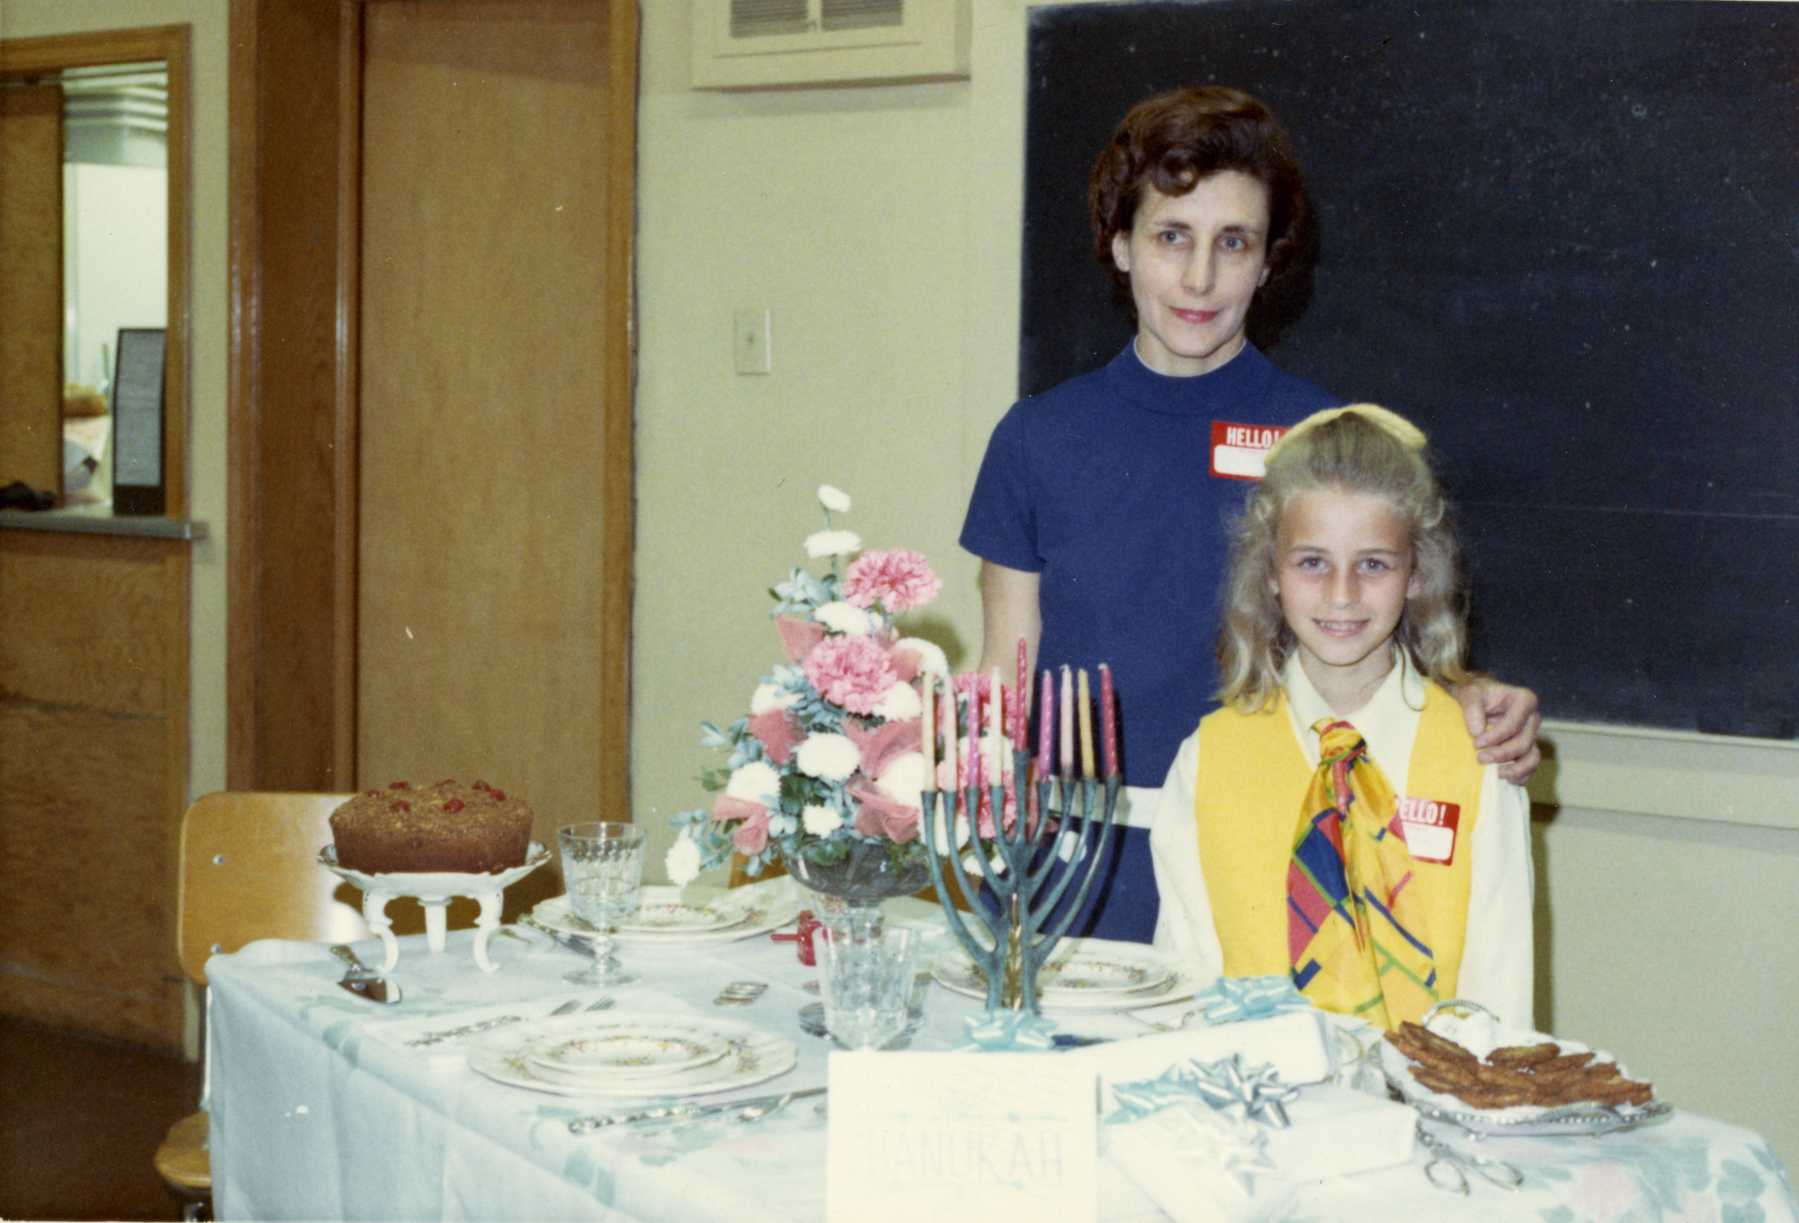 Pictured from left to right: Libby Greenspan and Anne Saks.